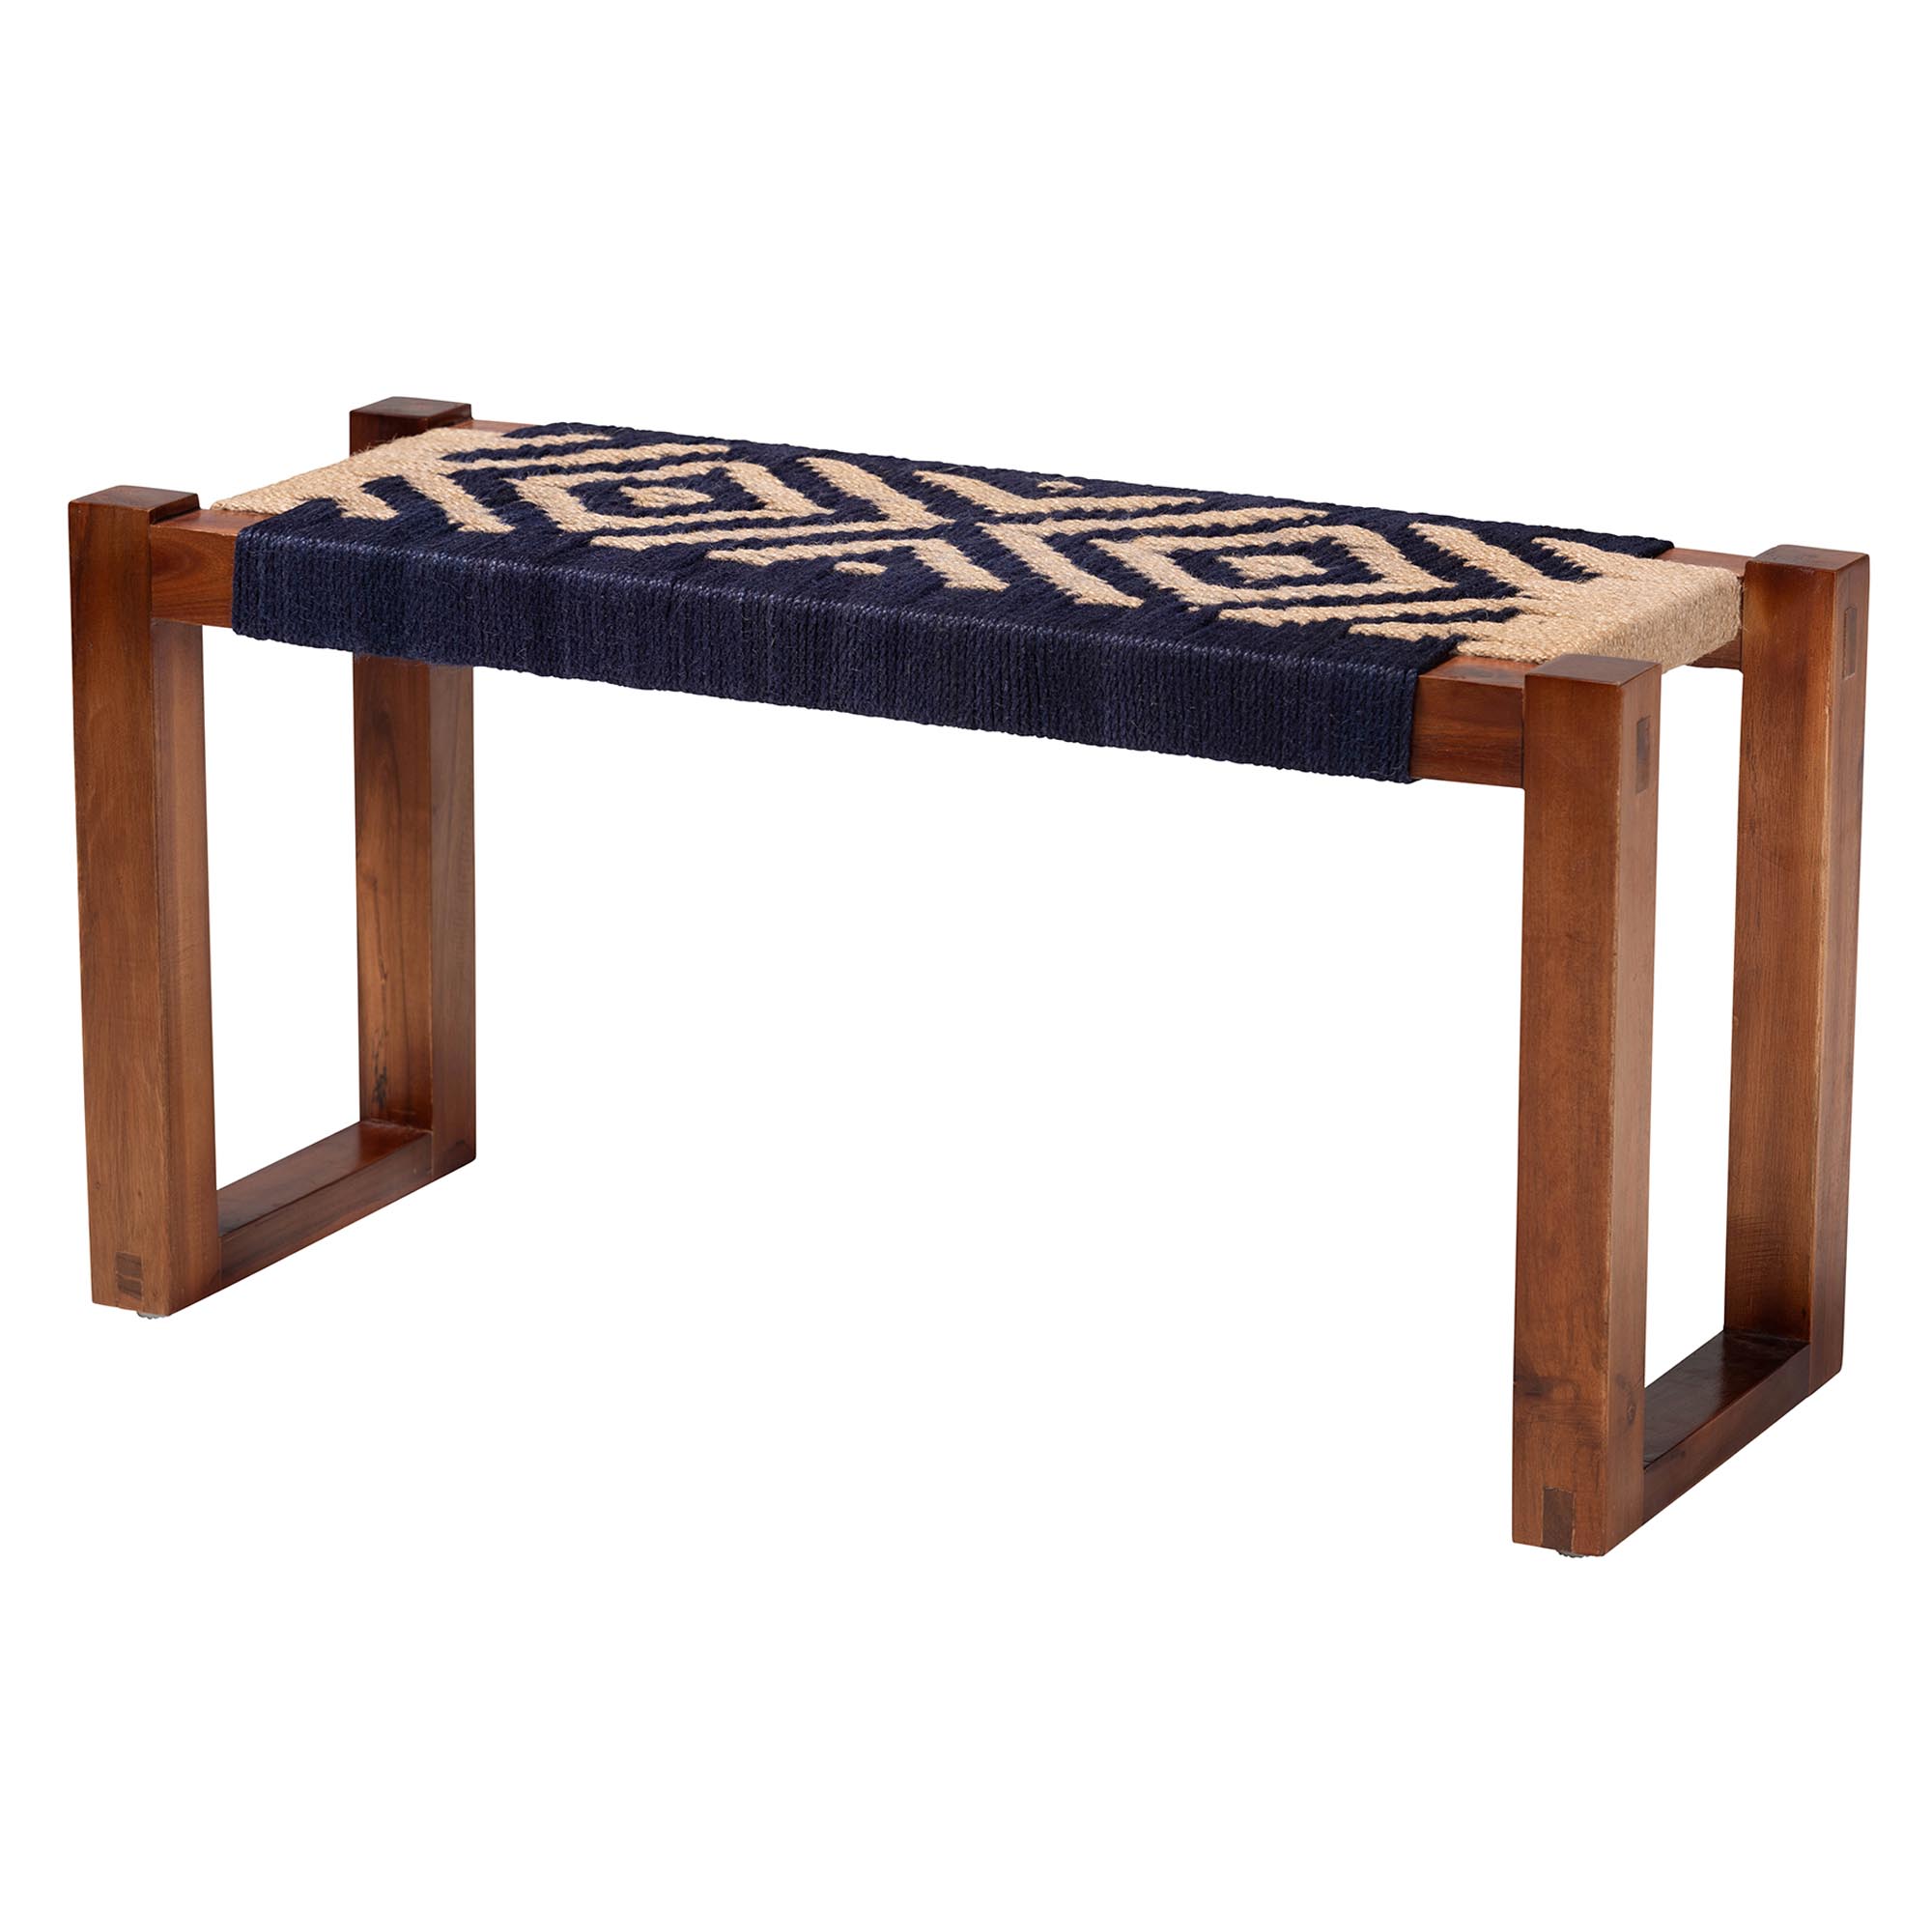 bali & pari Prunella Modern Bohemian Two-Tone Navy Blue and Natural Brown Seagrass and Acacia Wood Accent Bench